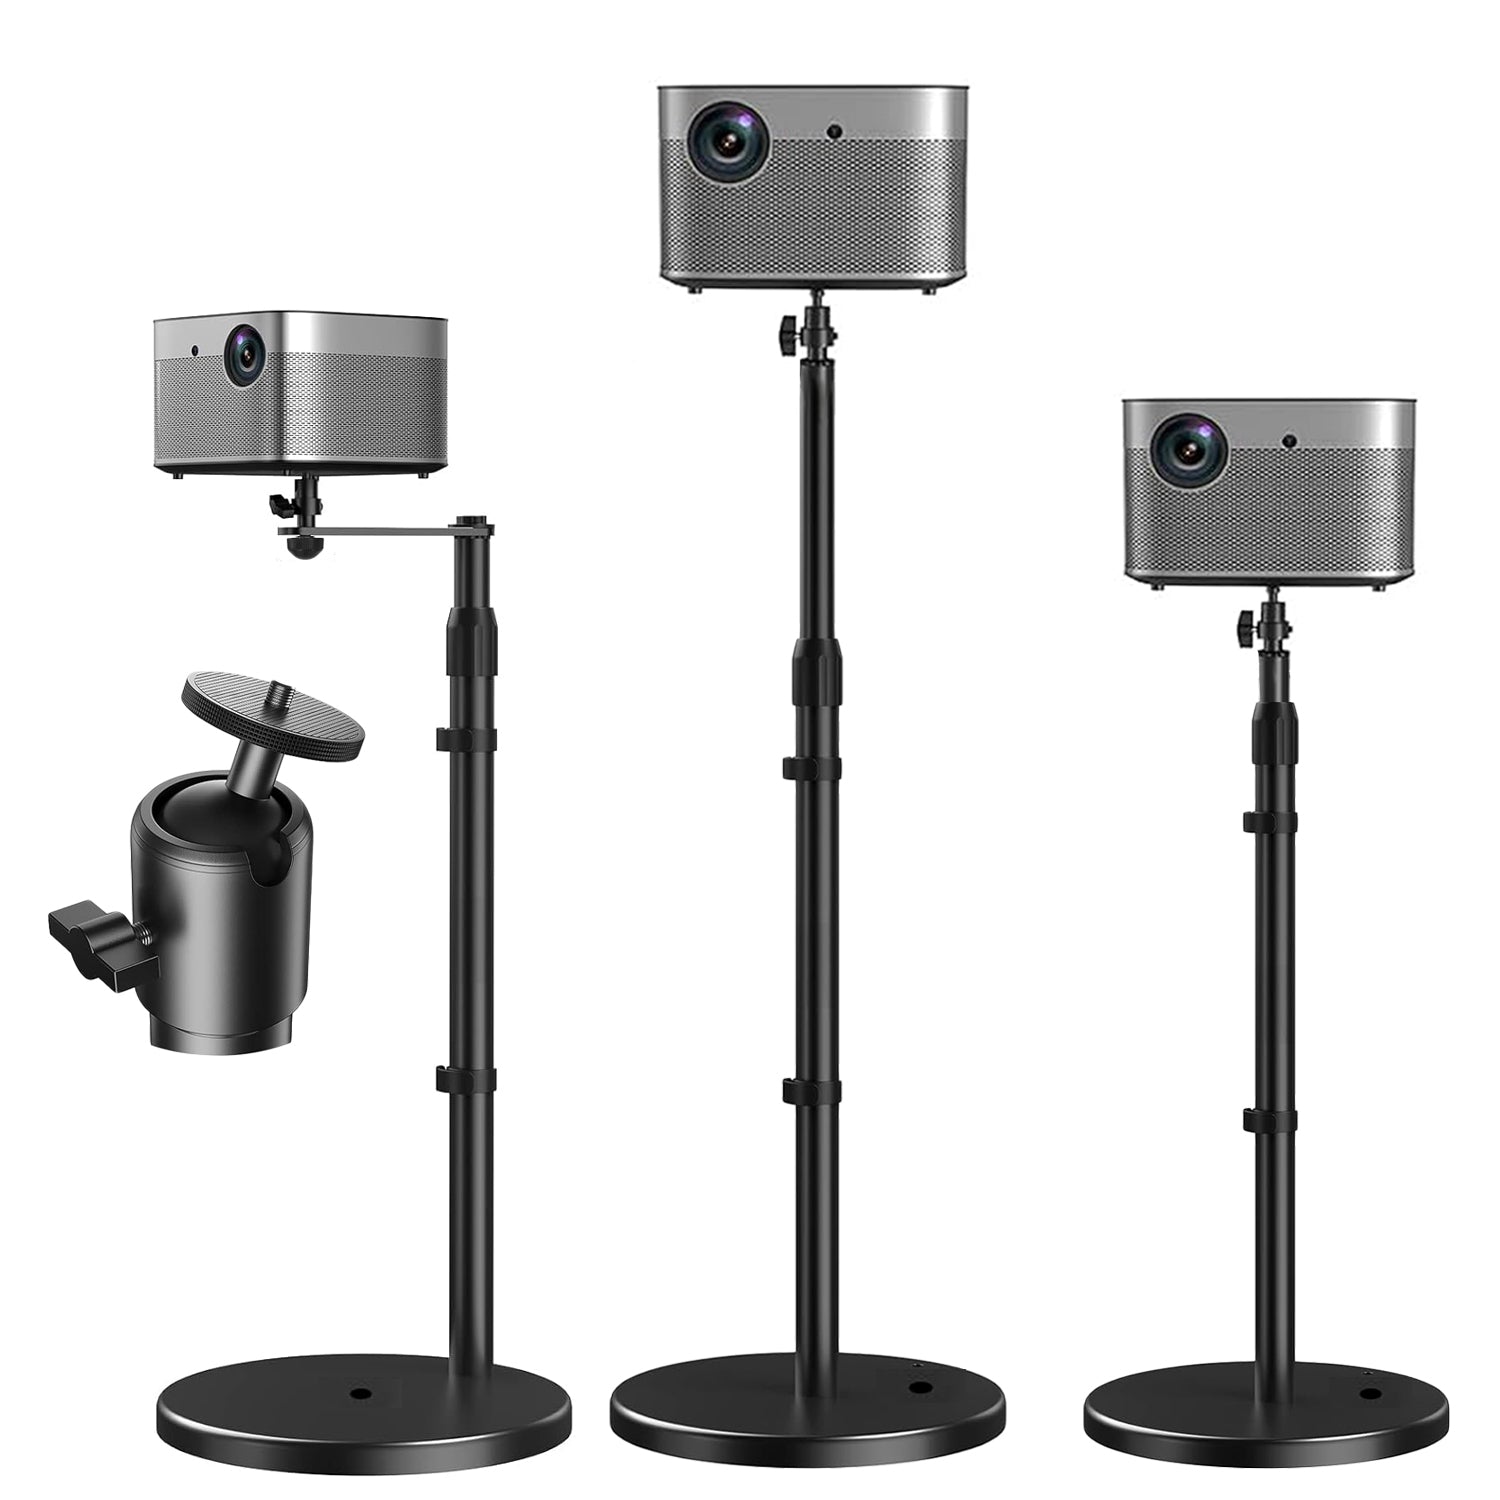 5 Core Projector Stand • Height Adjustable Projector Mount • w 360° Swivel • 3 Mounting Options